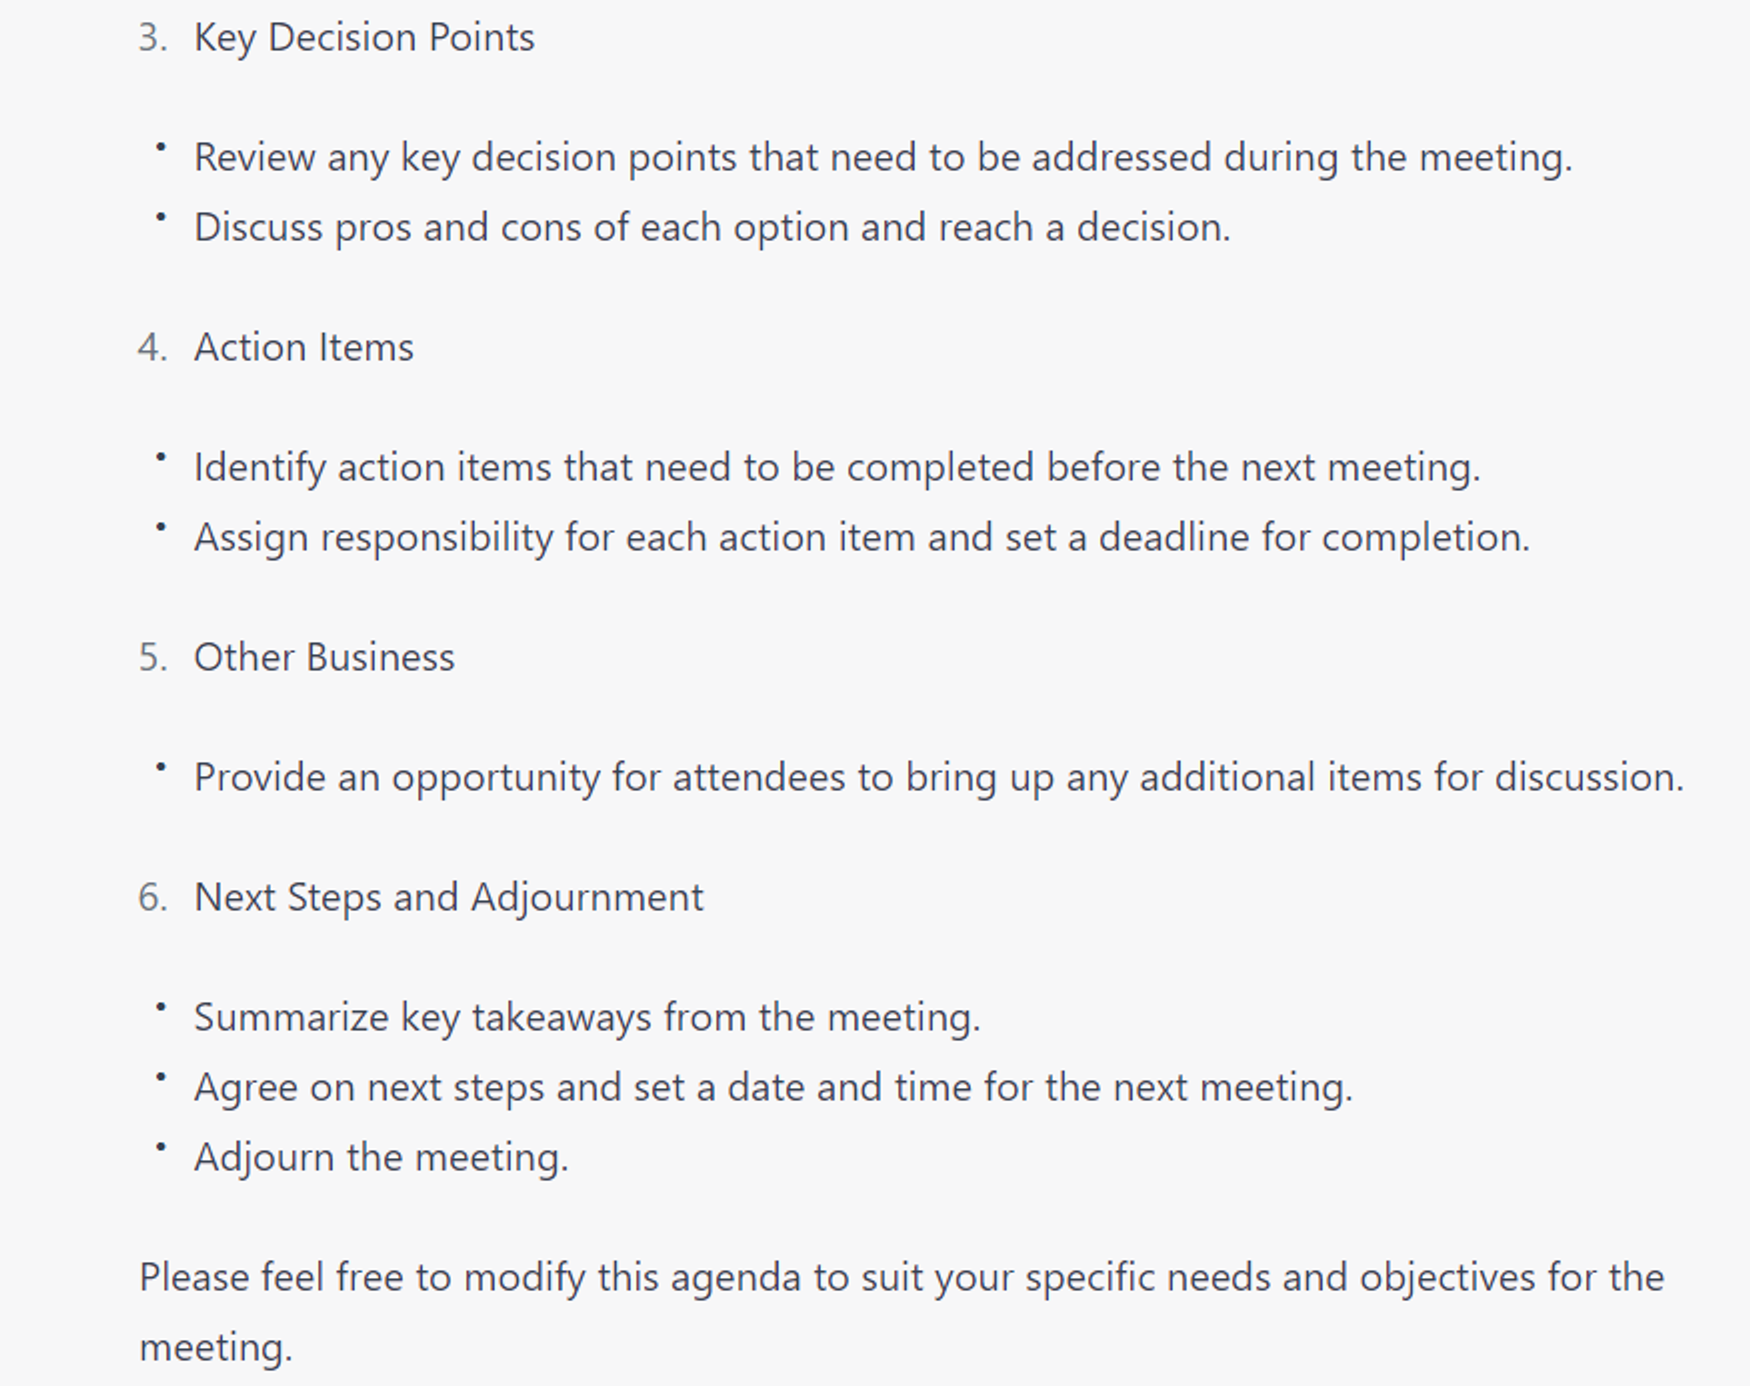  7 Strategic ChatGPT Prompts: Request meeting agenda from client